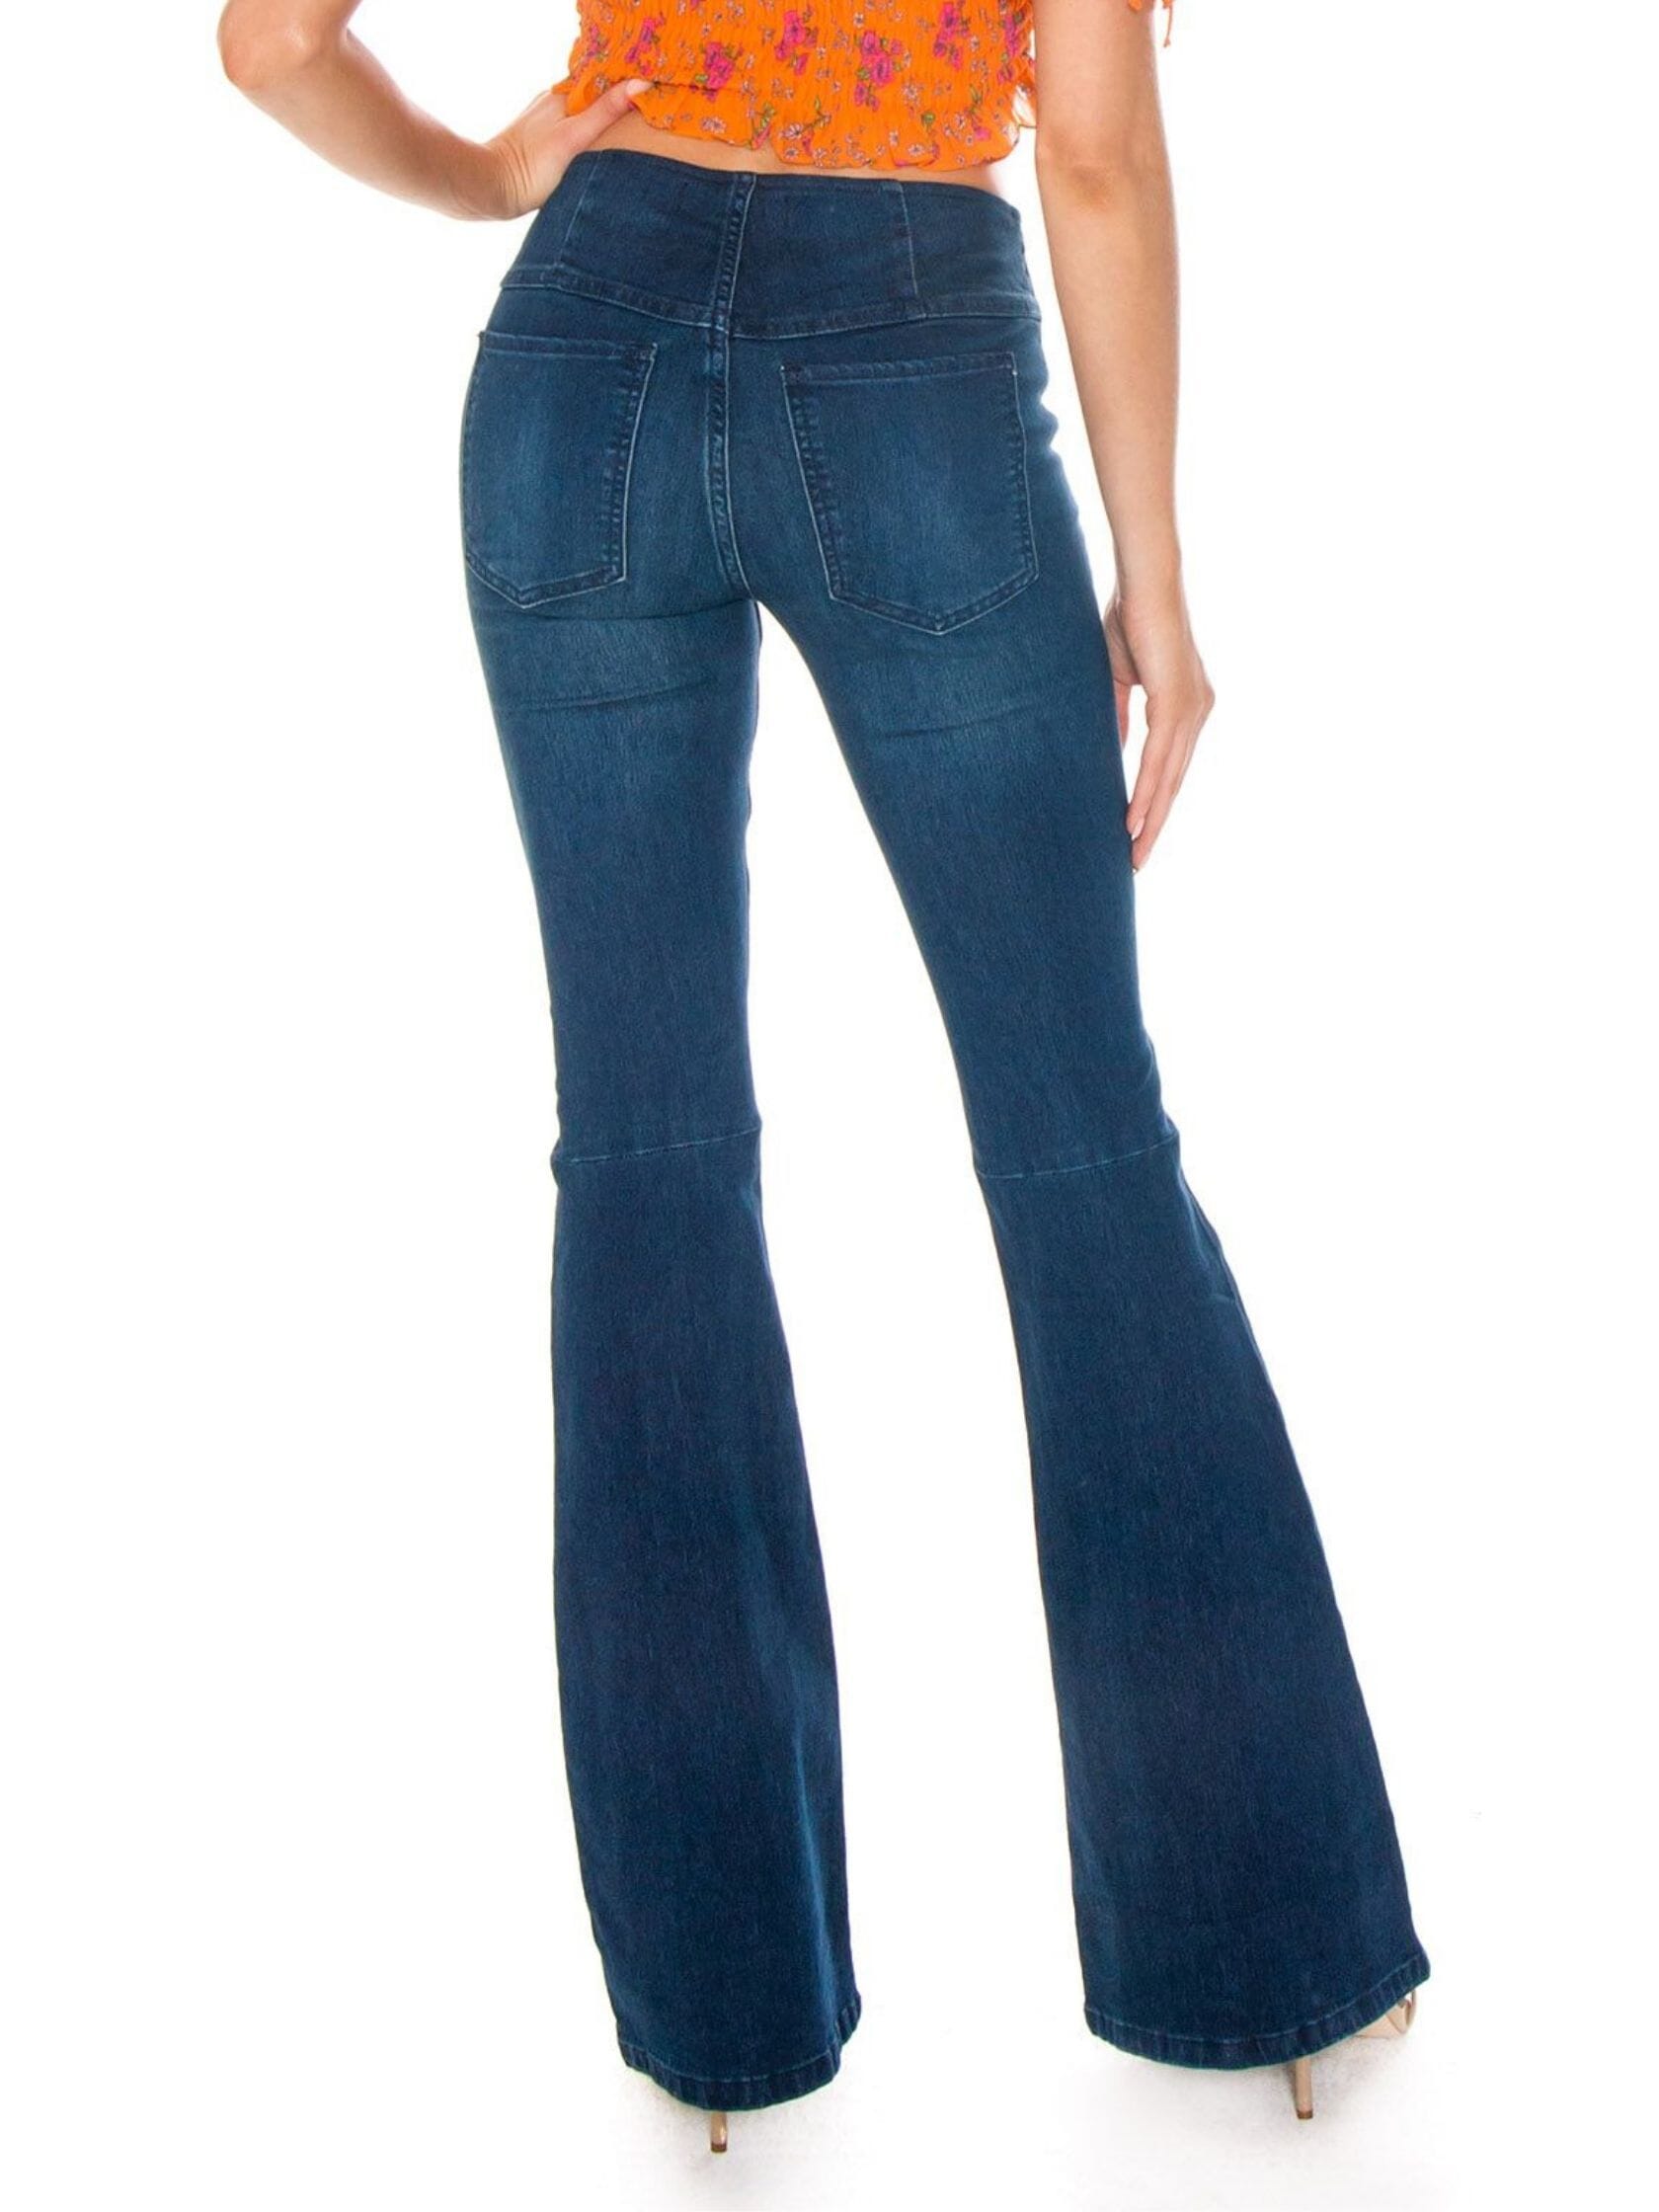 Free People | Penny Pull On Flare Jeans in Denim Blue| FashionPass